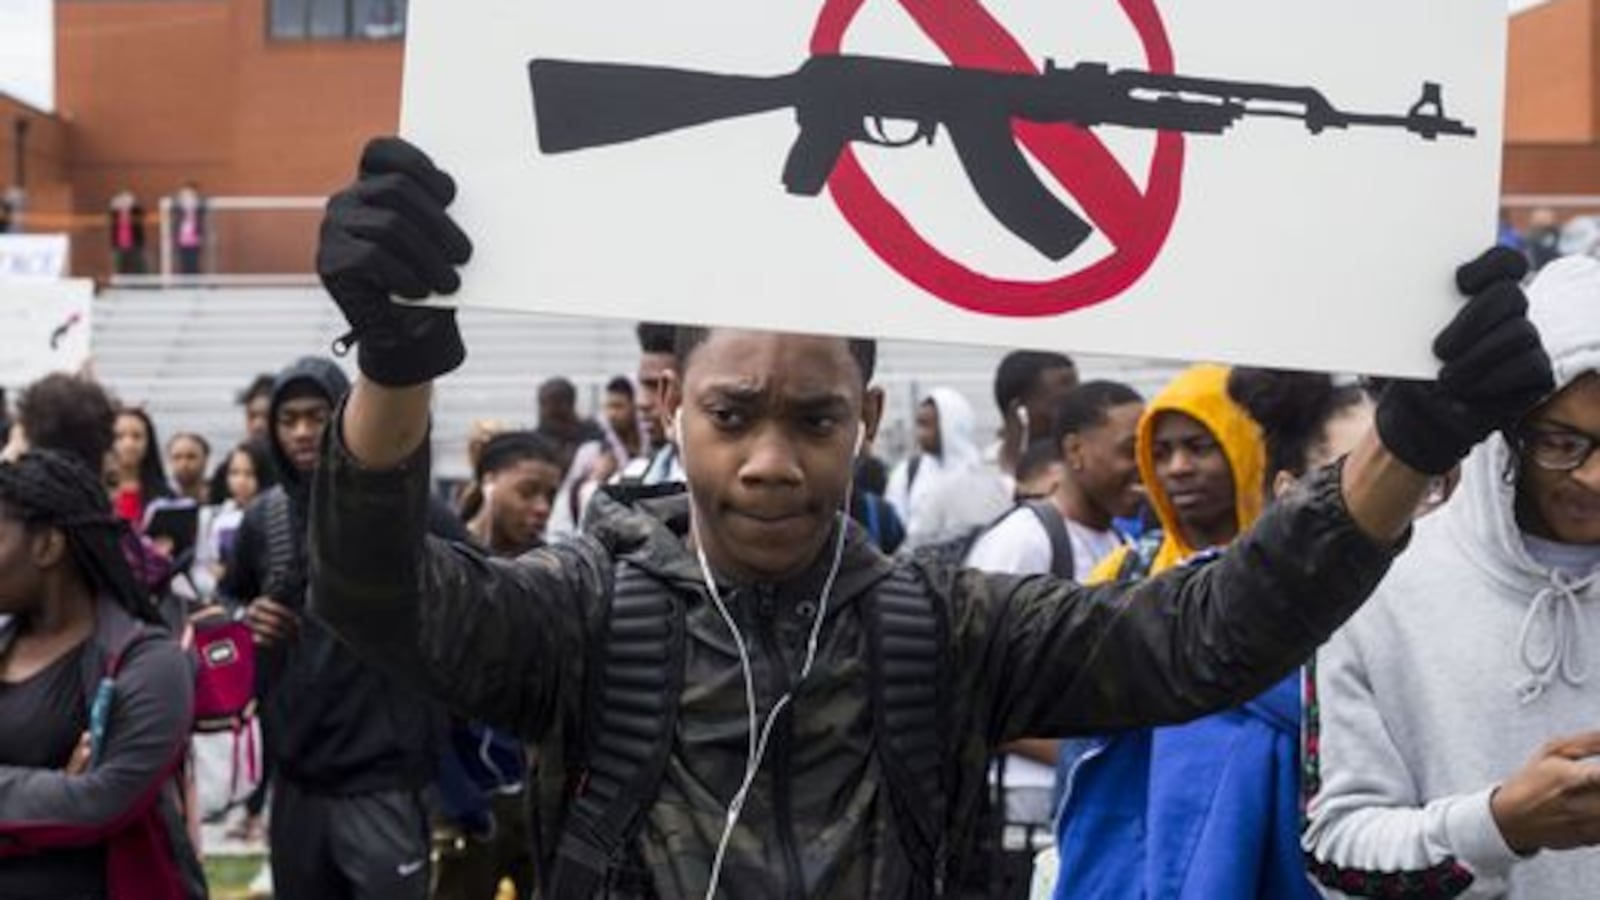 Kyus Carter, a junior at Cordova High School, holds up a sign during a student walkout last year to protest gun violence.